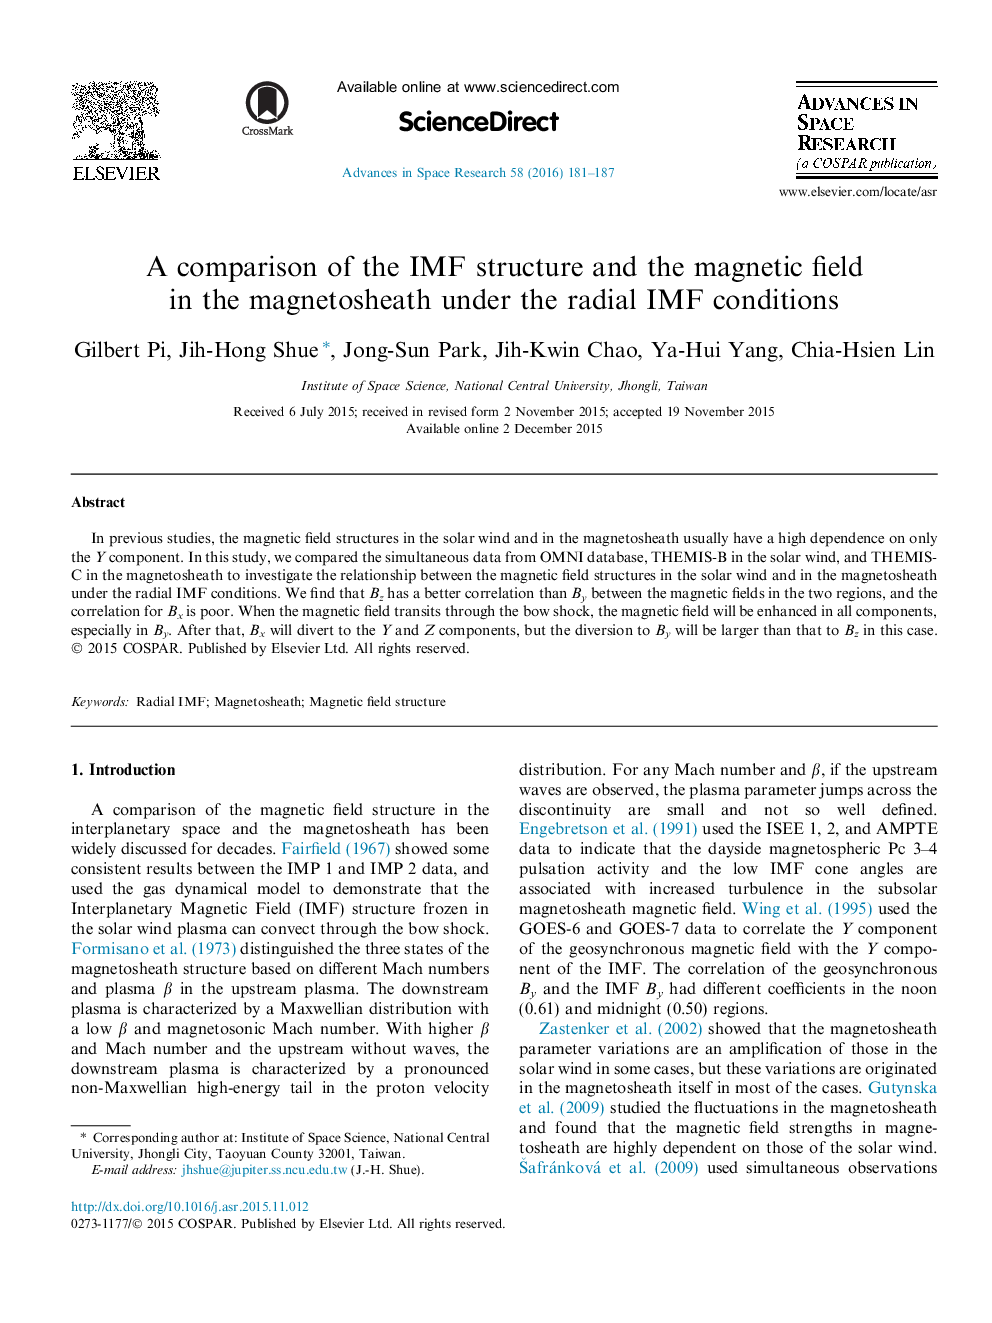 A comparison of the IMF structure and the magnetic field in the magnetosheath under the radial IMF conditions